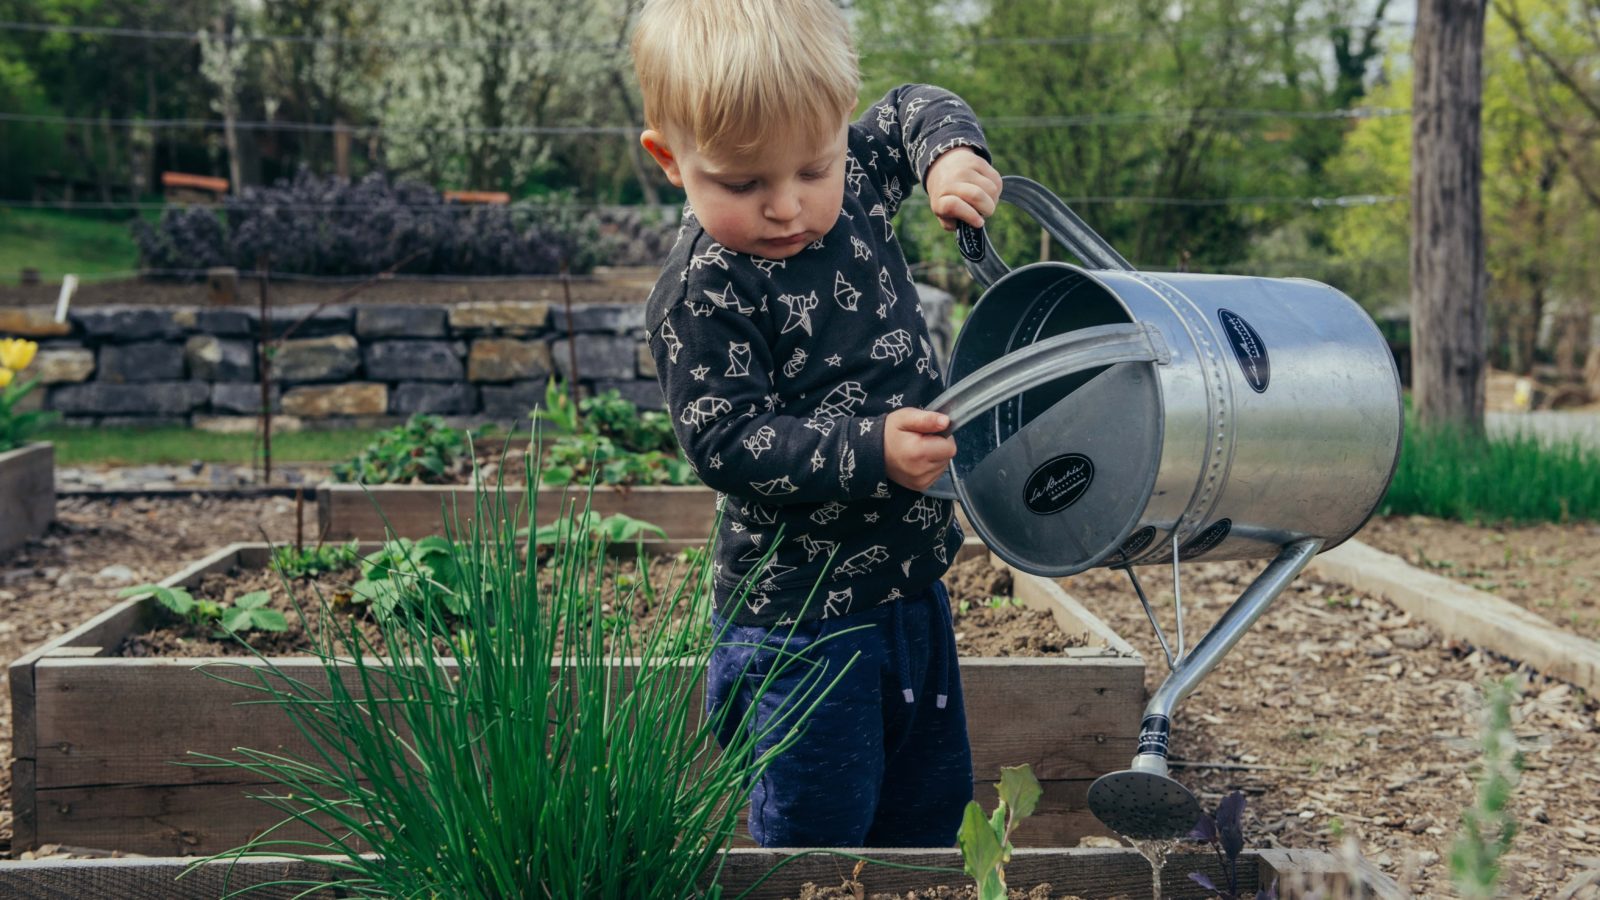 a small blonde child standing in a water garden watering the plants with a large metal watering can